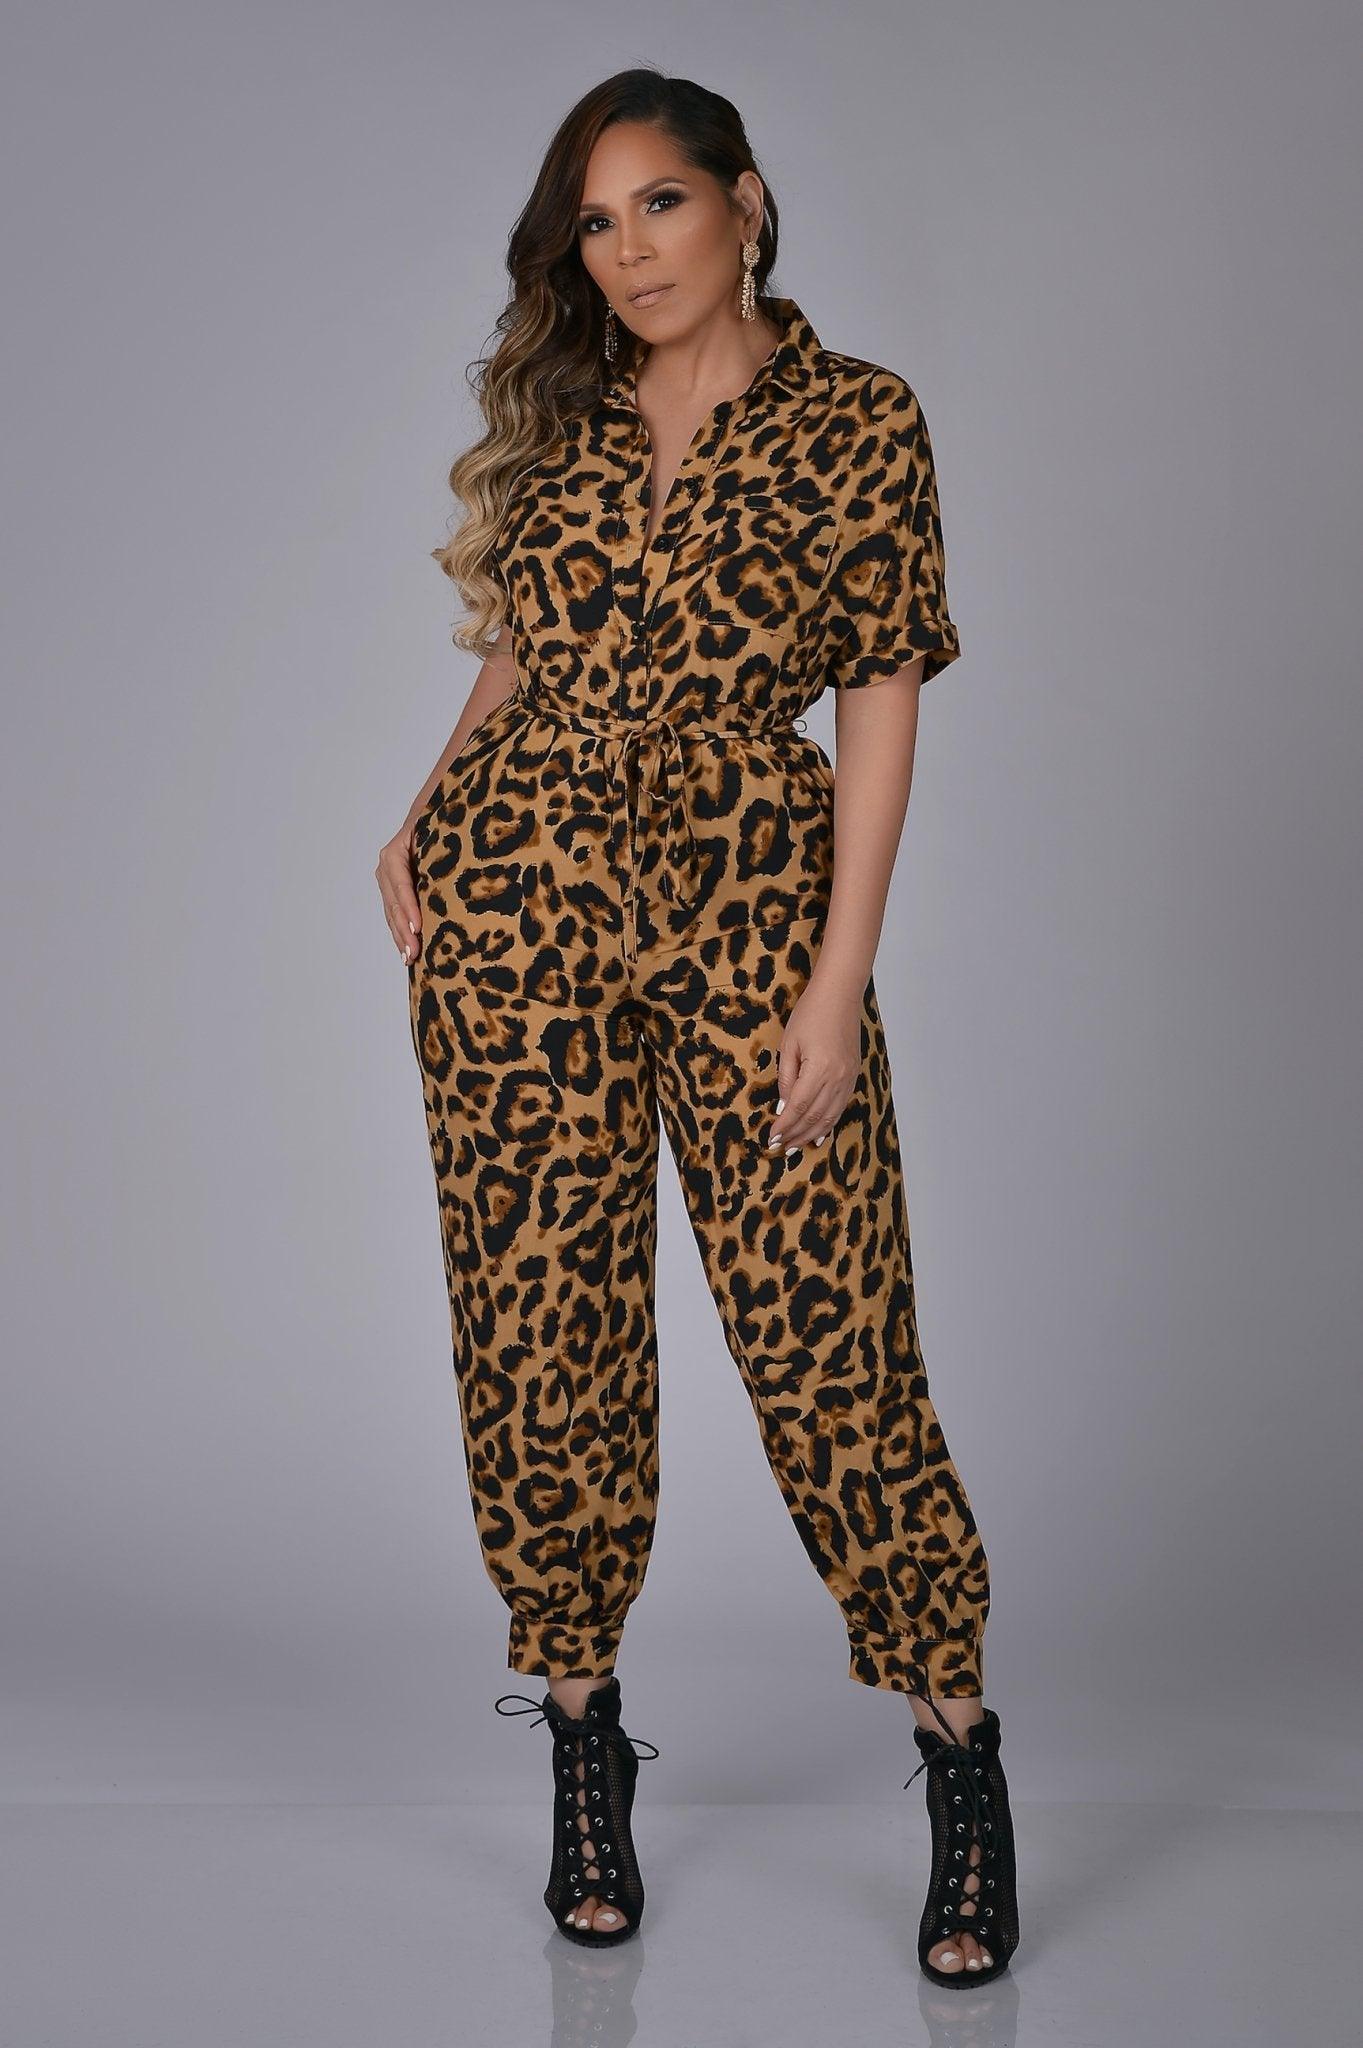 Giana Casual Cheetah Print Jumpsuit - MY SEXY STYLES